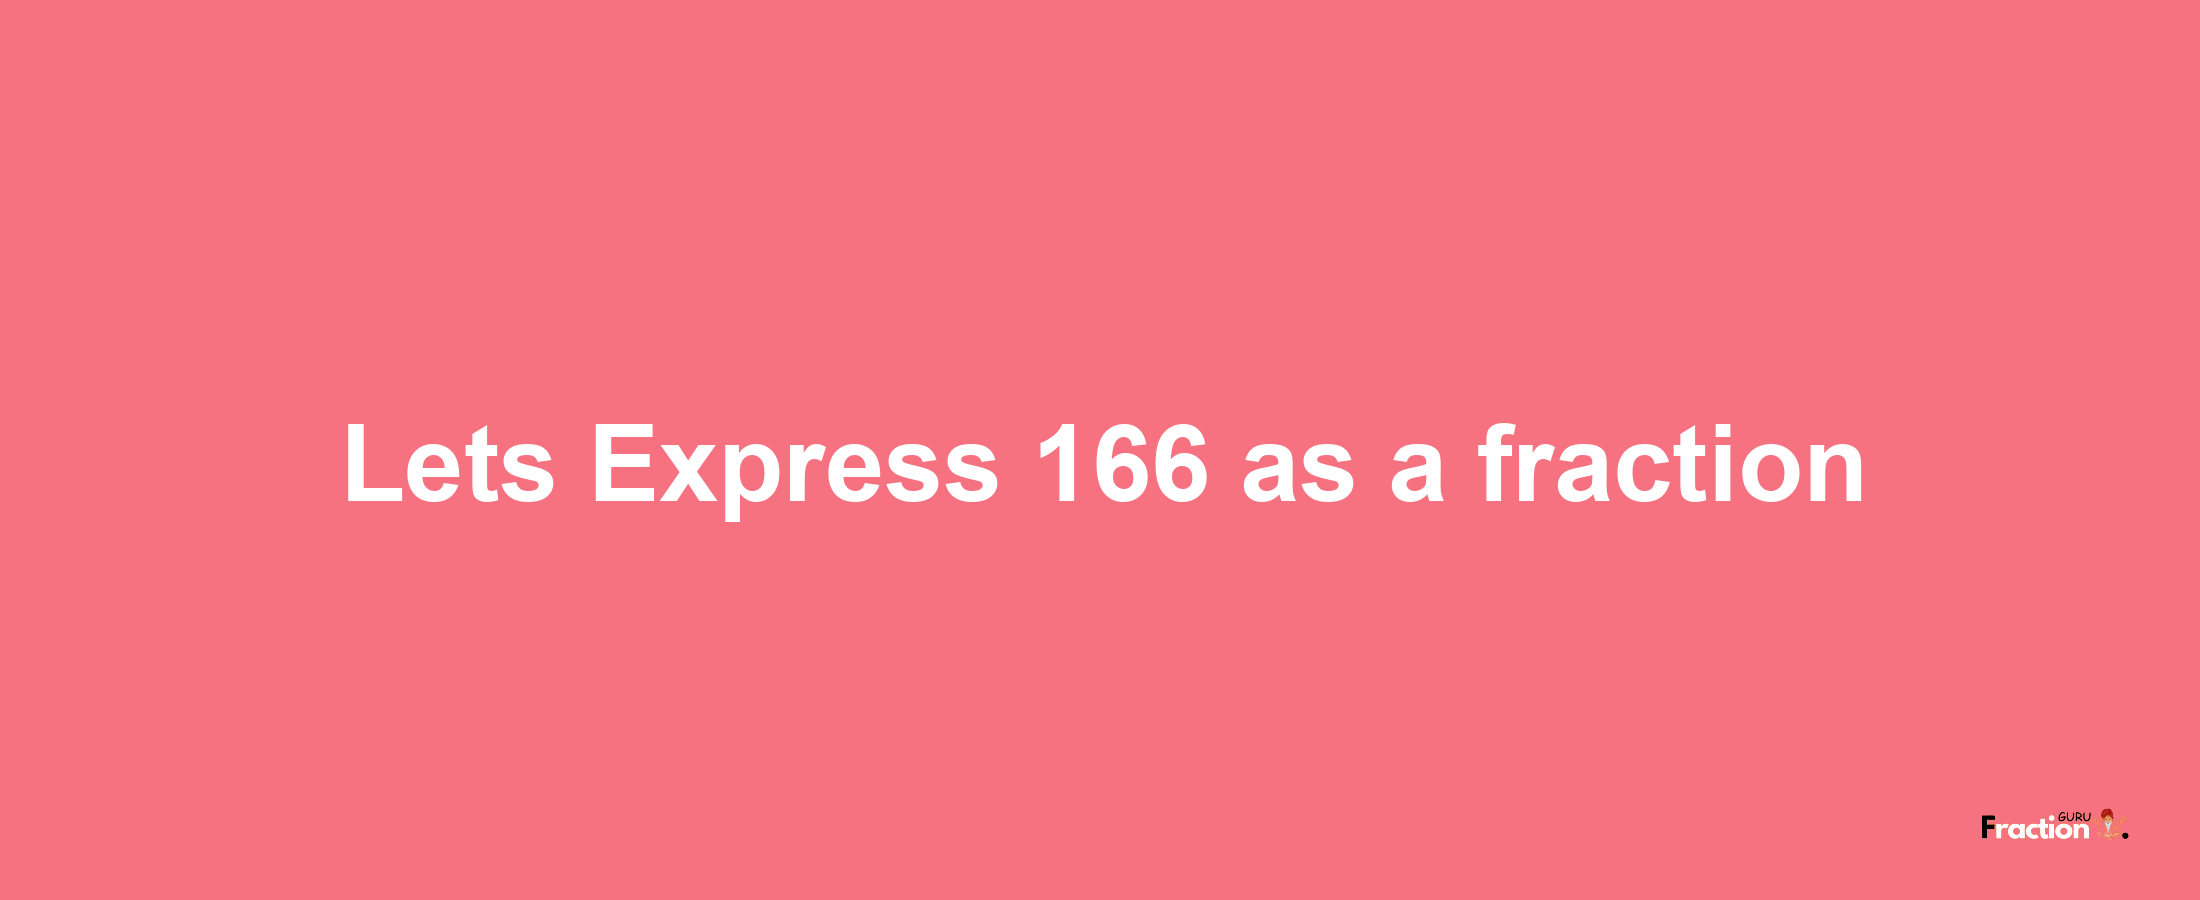 Lets Express 166 as afraction